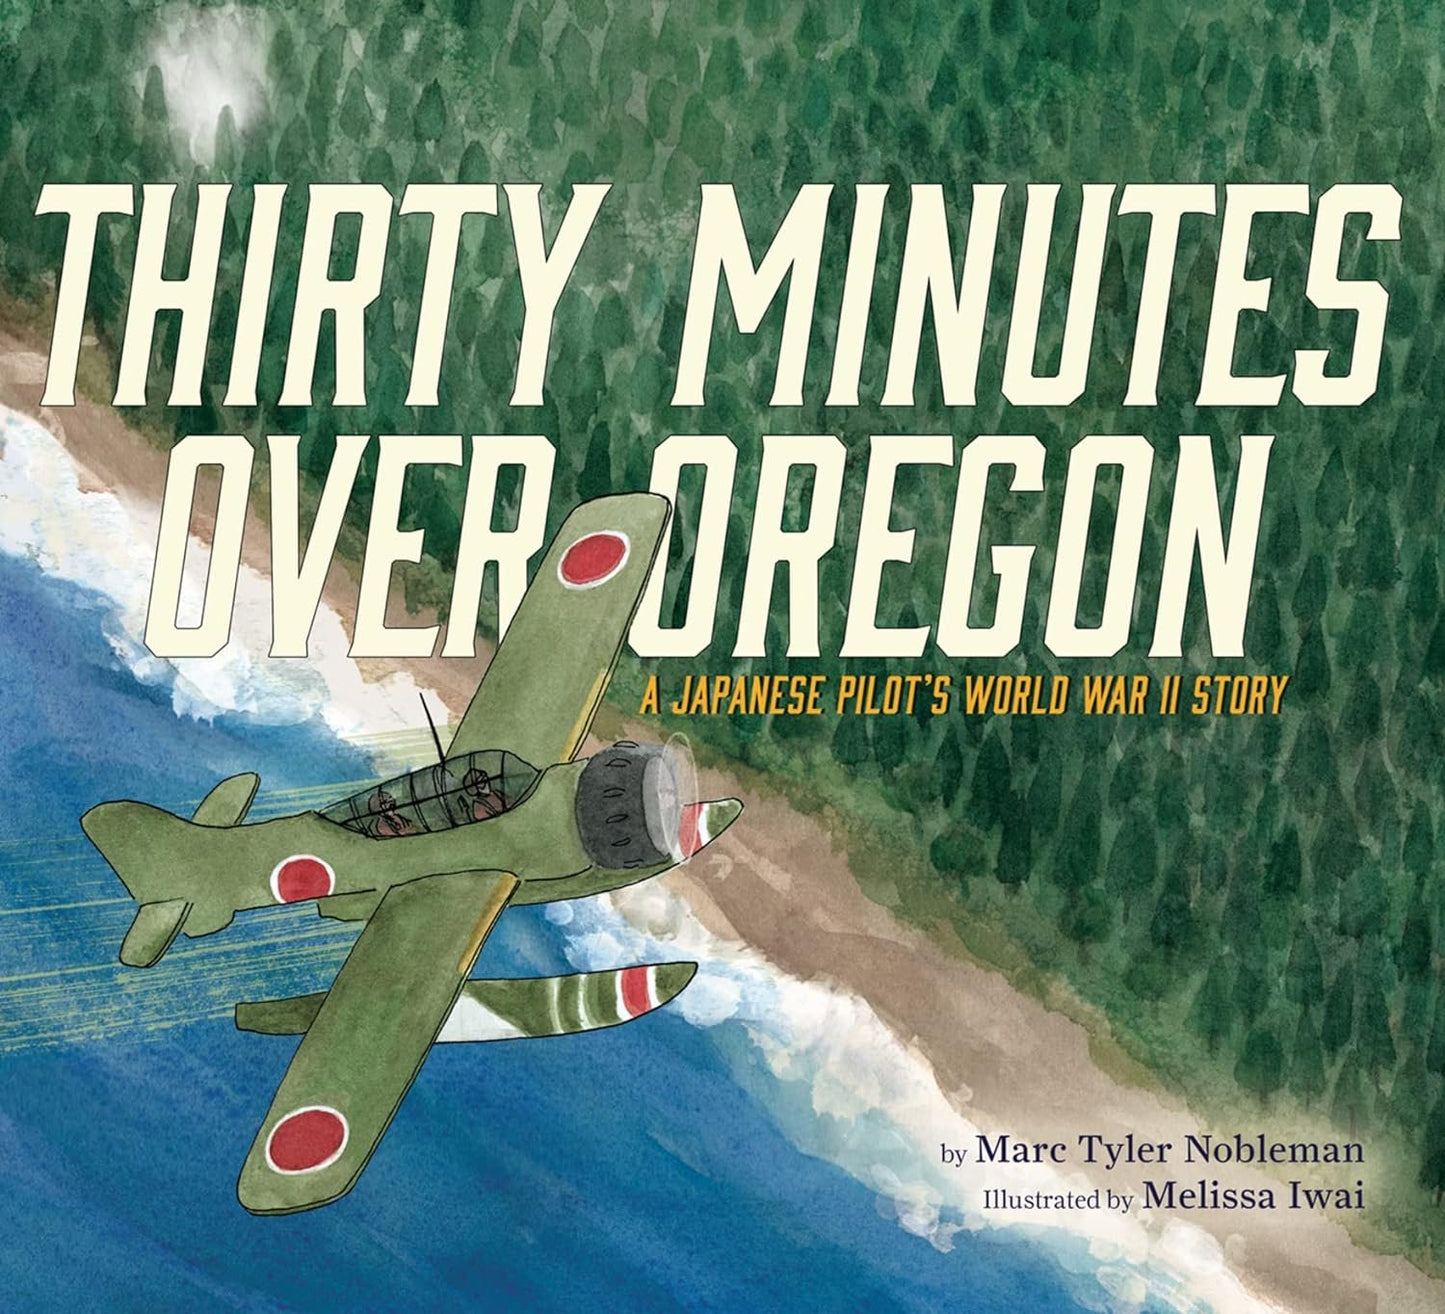 Thirty Minutes Over Oregon: A Japanese Pilot's World War II Story